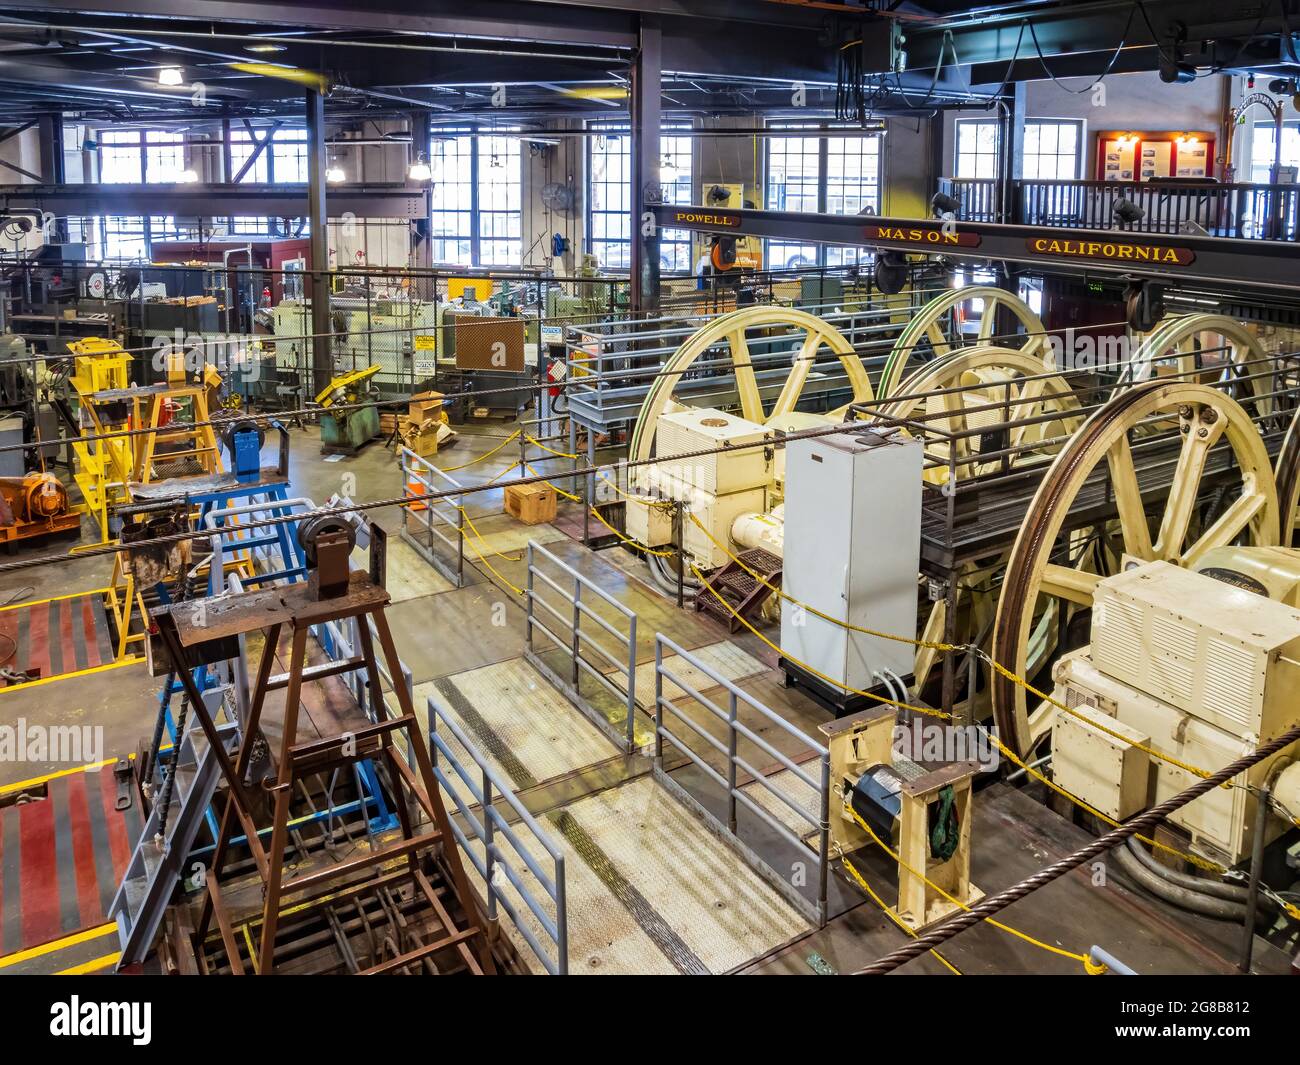 San Francisco, MAY 22, 2021 - Interior view of the Cable car museum Stock Photo